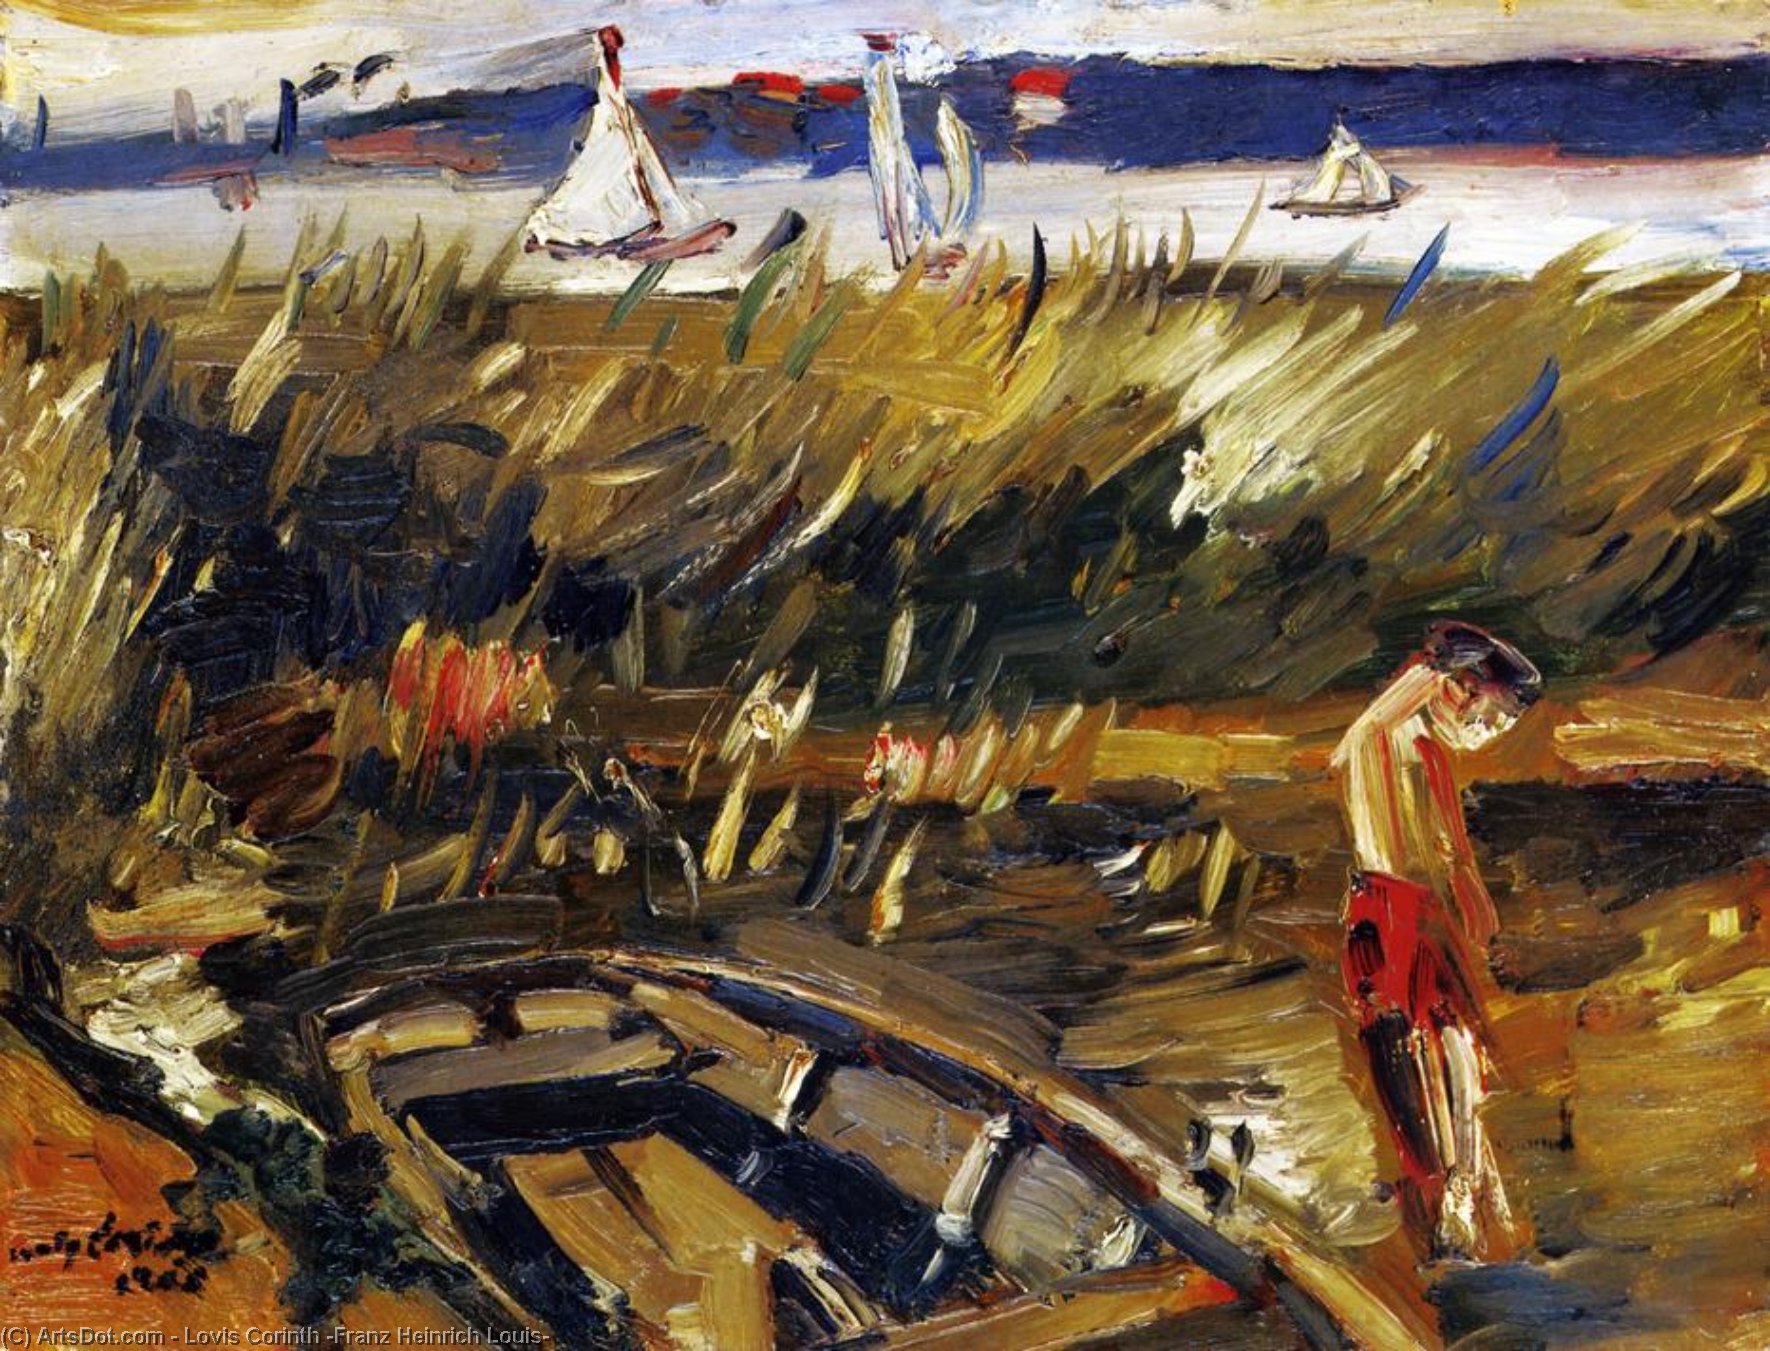 Buy Museum Art Reproductions Punt in the Reeds at Muritzsee, 1915 by Lovis Corinth (Franz Heinrich Louis) (1858-1925, Netherlands) | ArtsDot.com